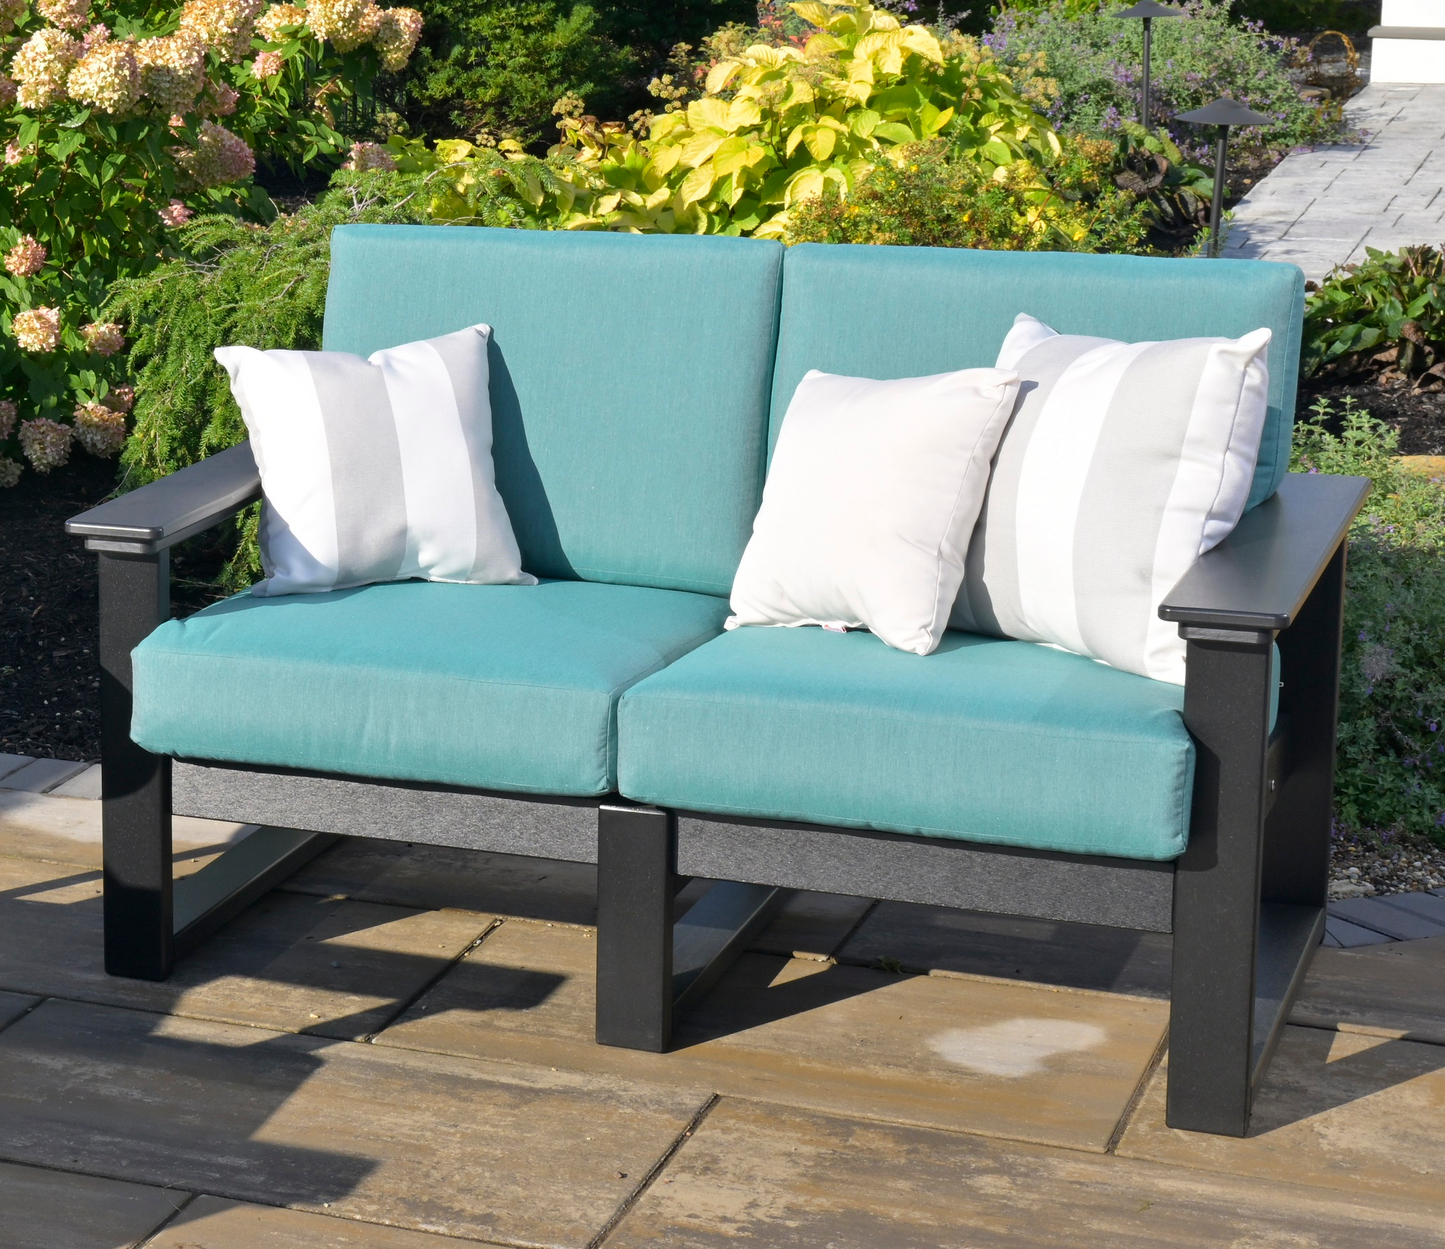 LuxCraft Recycled Plastic Lanai Deep Seating Loveseat - LEAD TIME TO SHIP 3 TO 4 WEEKS